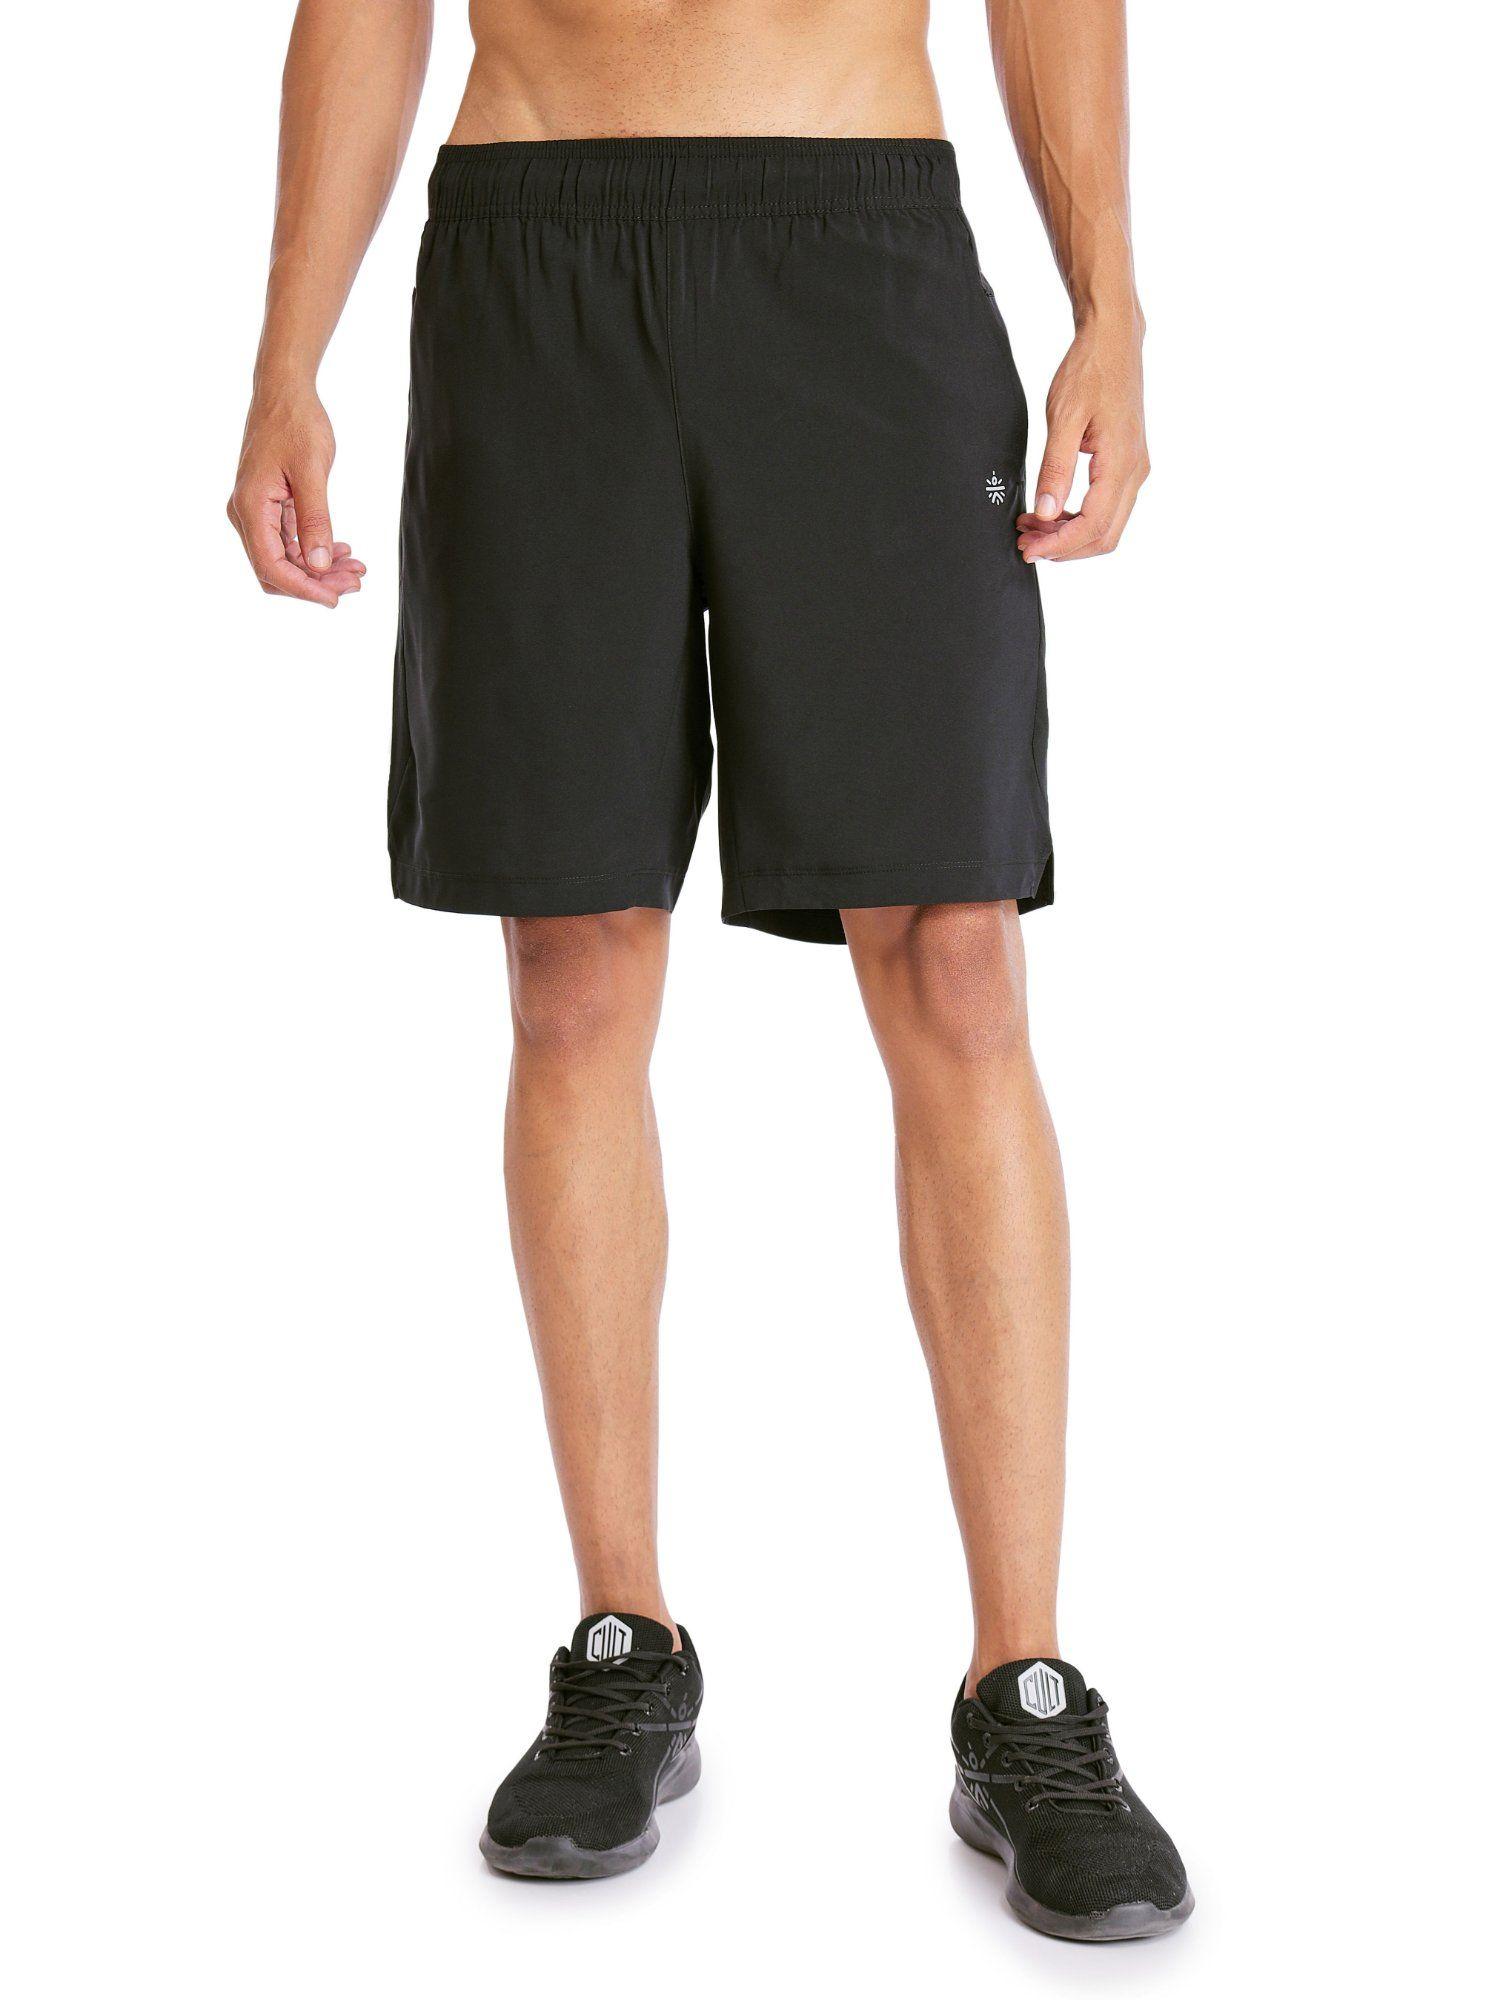 running shorts with side pockets